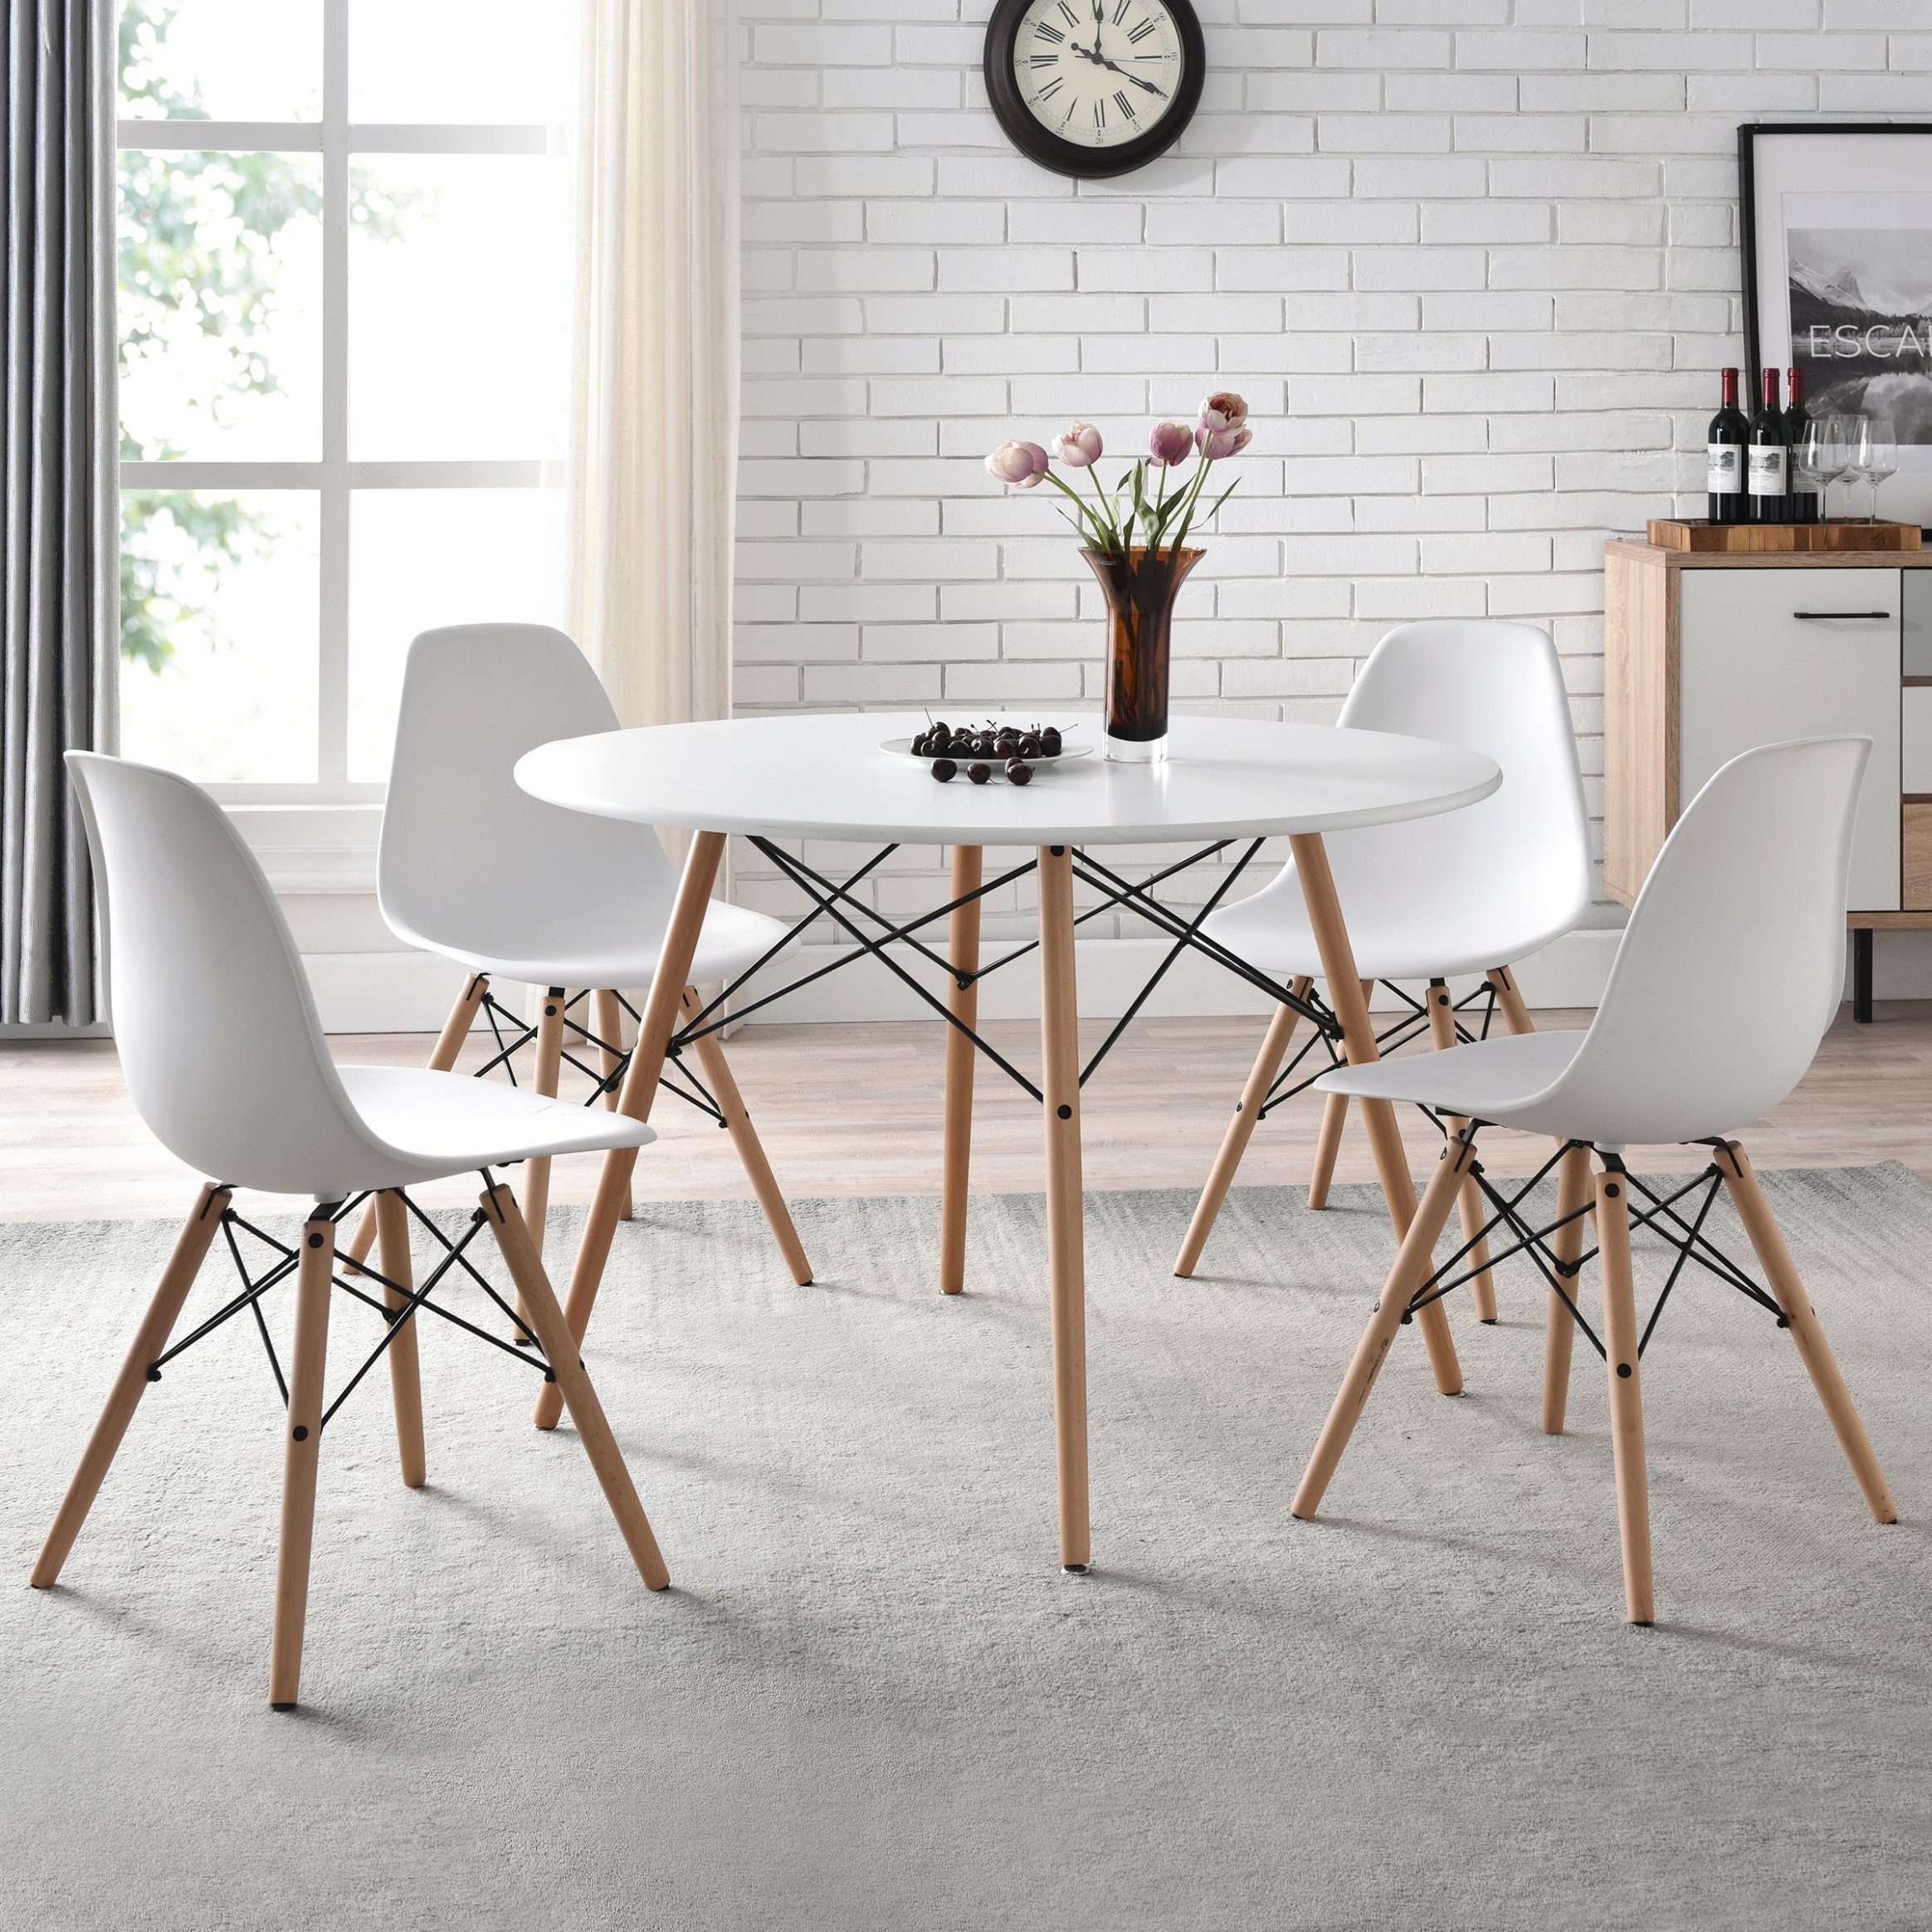 Mainstays Mid-Century Modern Dining Chair, Set of 5, White and Beech Color - modern kitchen chairs